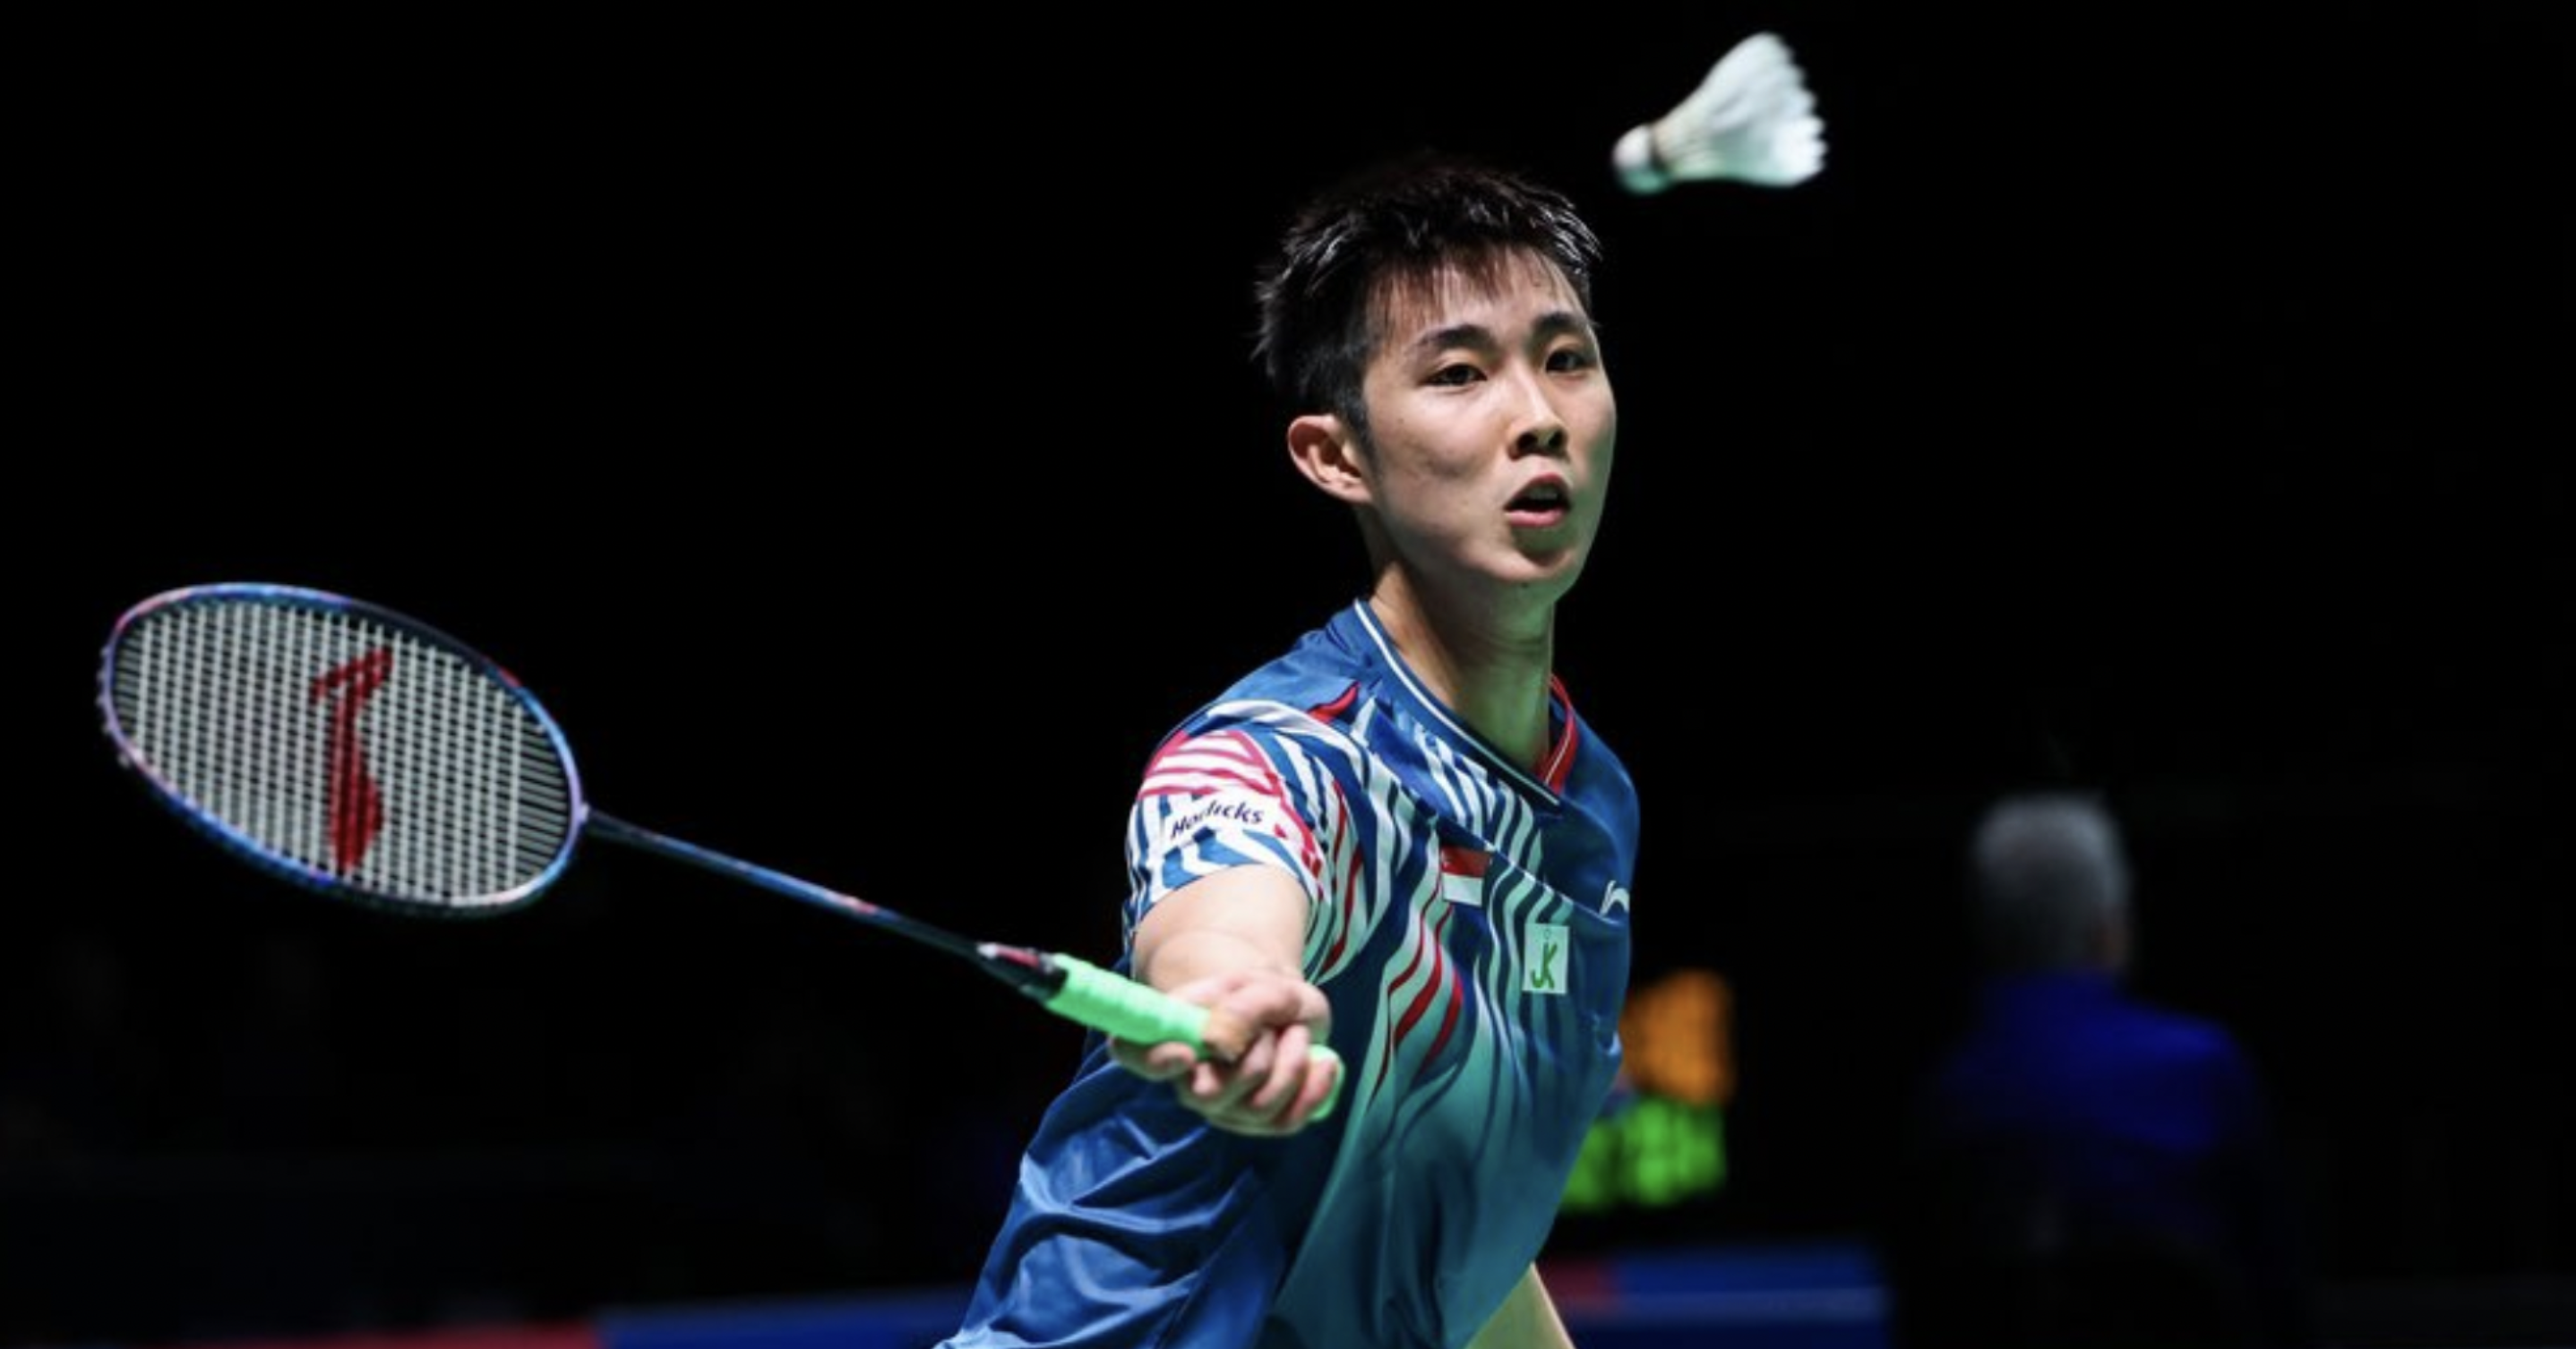 Loh Kean Yew is 1st Sporean to advance to Badminton Asia Championships finals - Mothership.SG